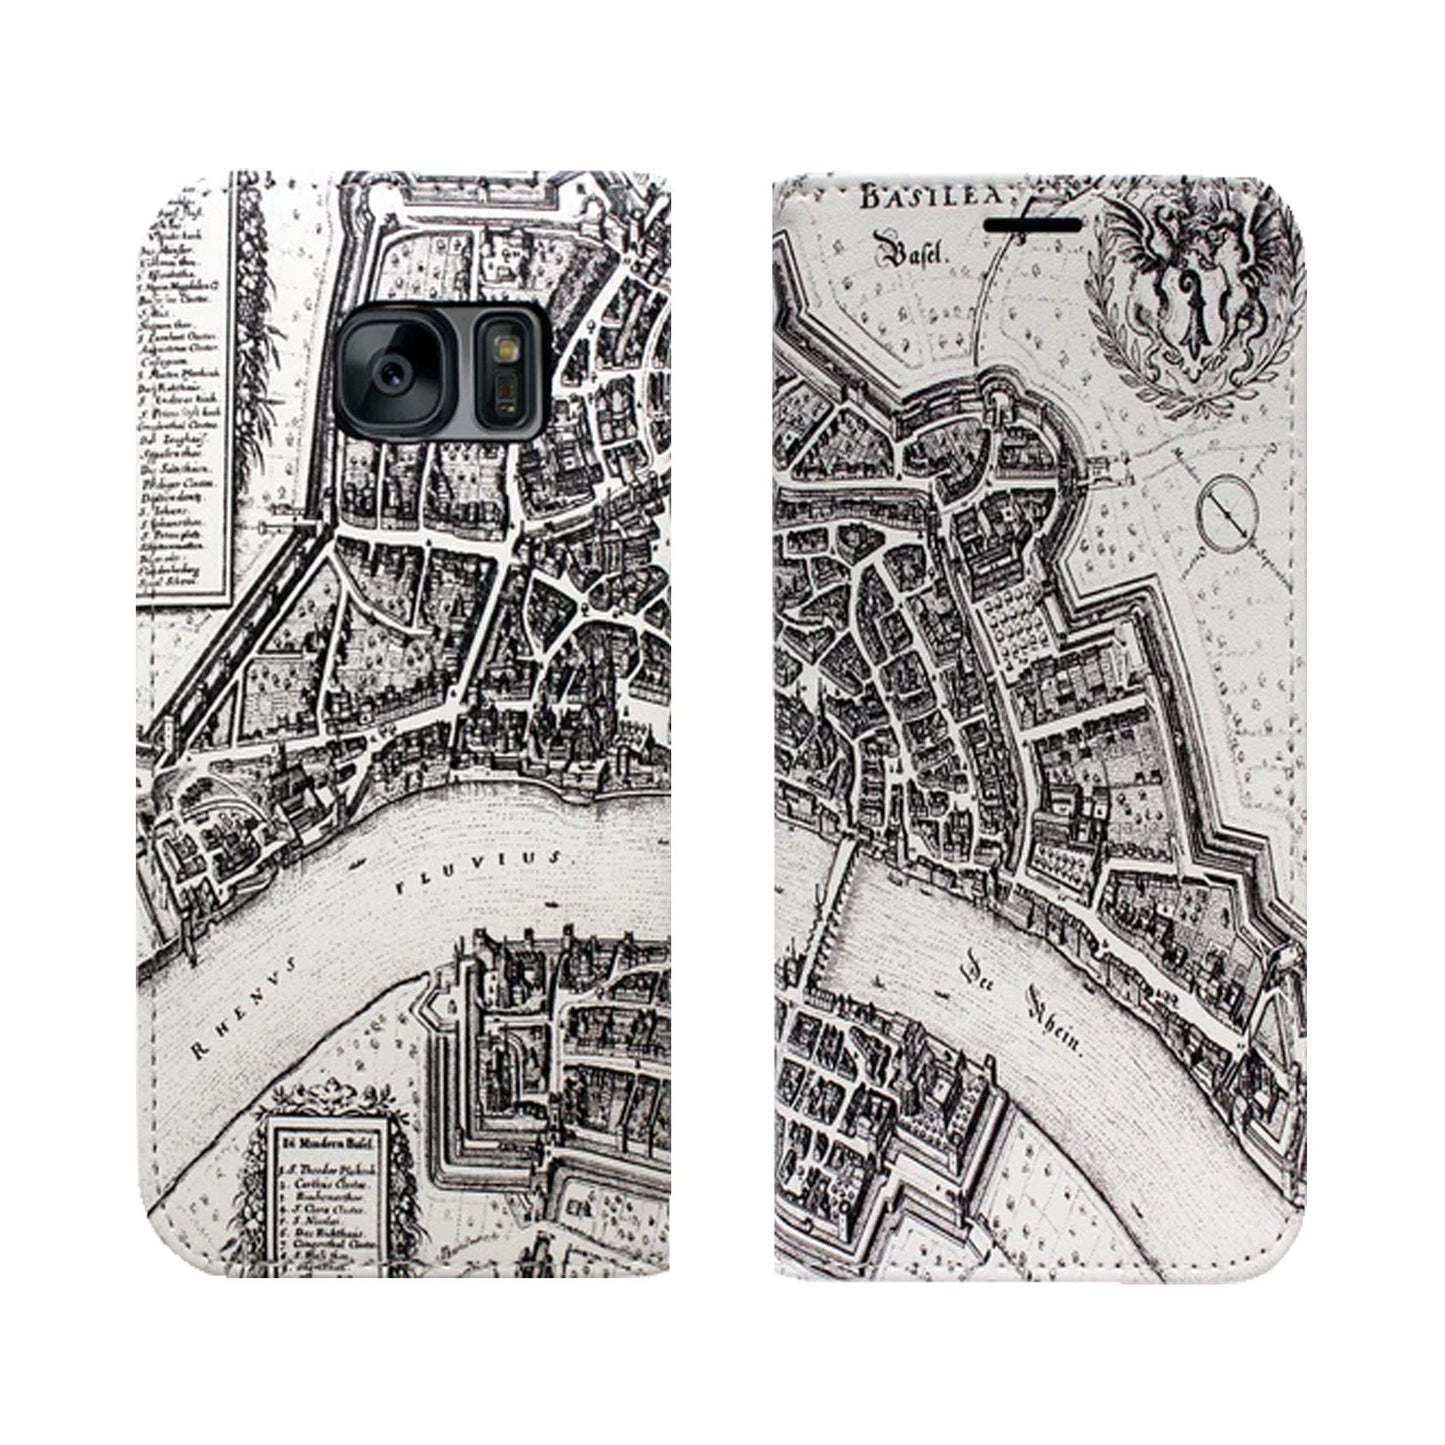 Basel Merian Panorama Case for iPhone, Samsung and Huawei